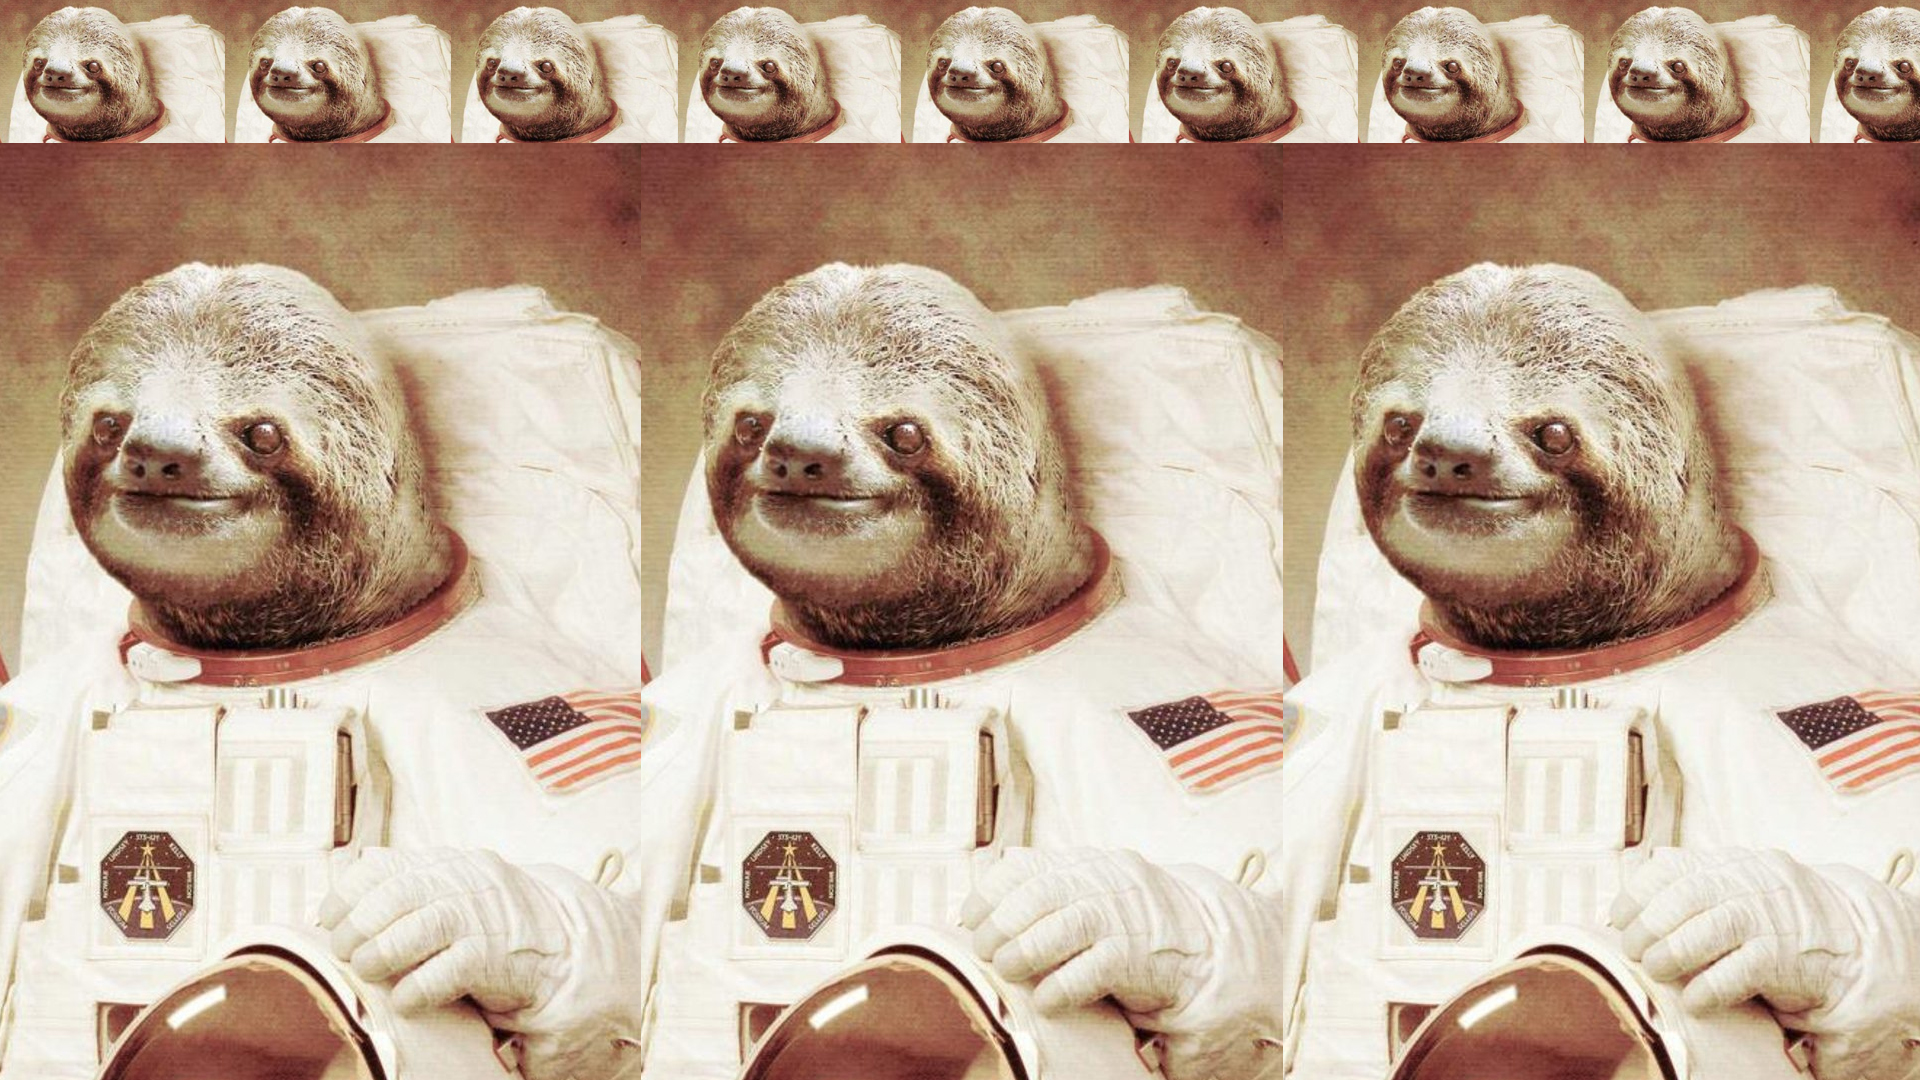 Astronaut Sloth For iPhone iPad Puter Wallpaper